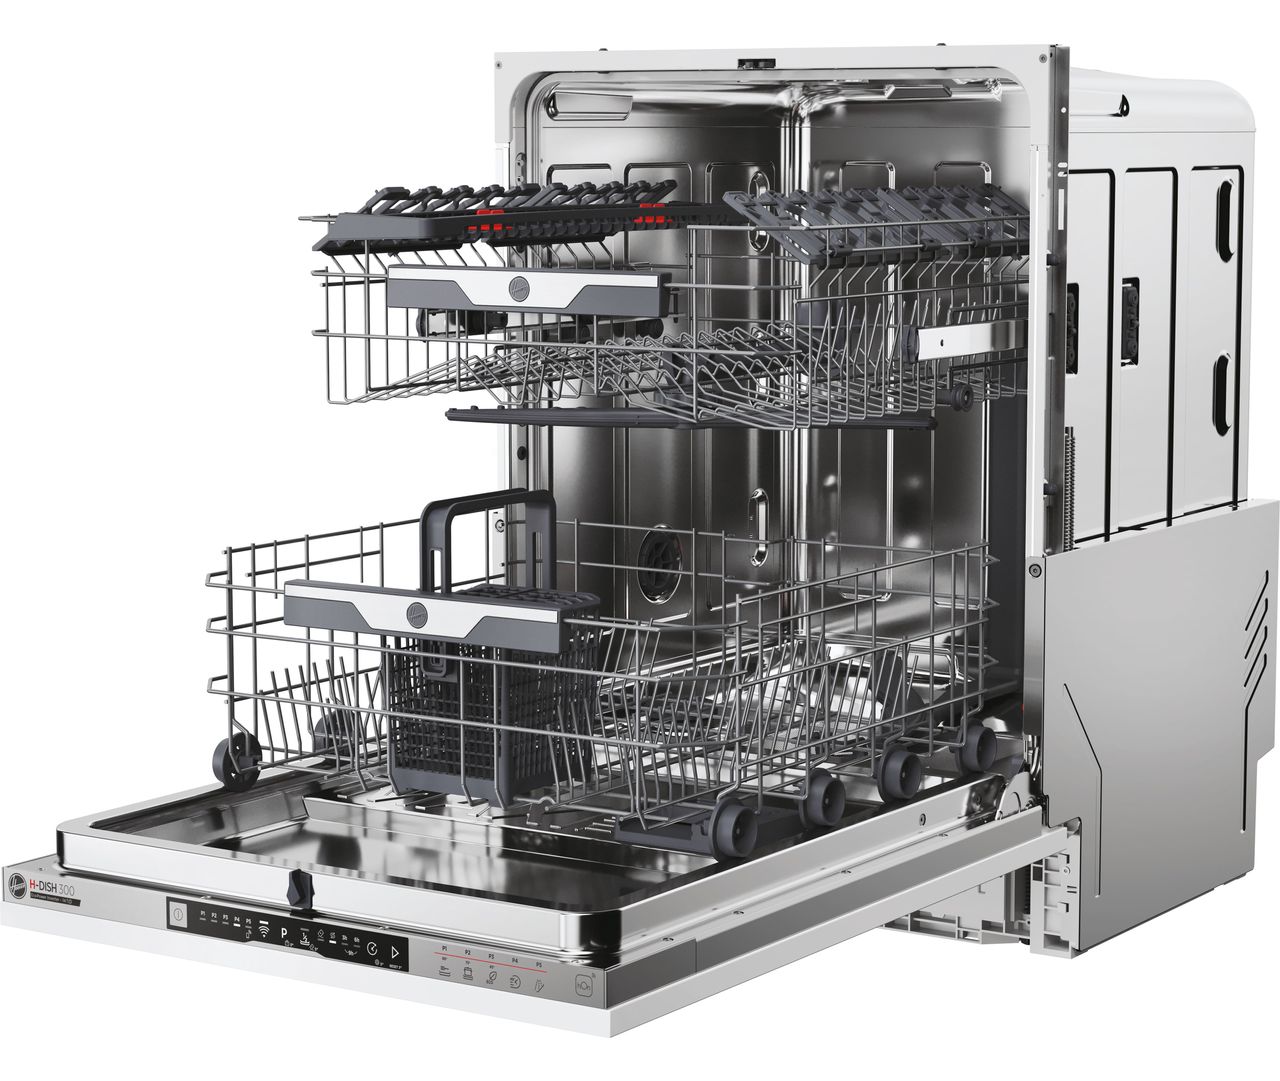 Buy Hoover HIB1 6B2S3FS-80 Built-In Fully Integrated Dishwasher  (HIB16B2S3FS-80) - Silver Control Panel